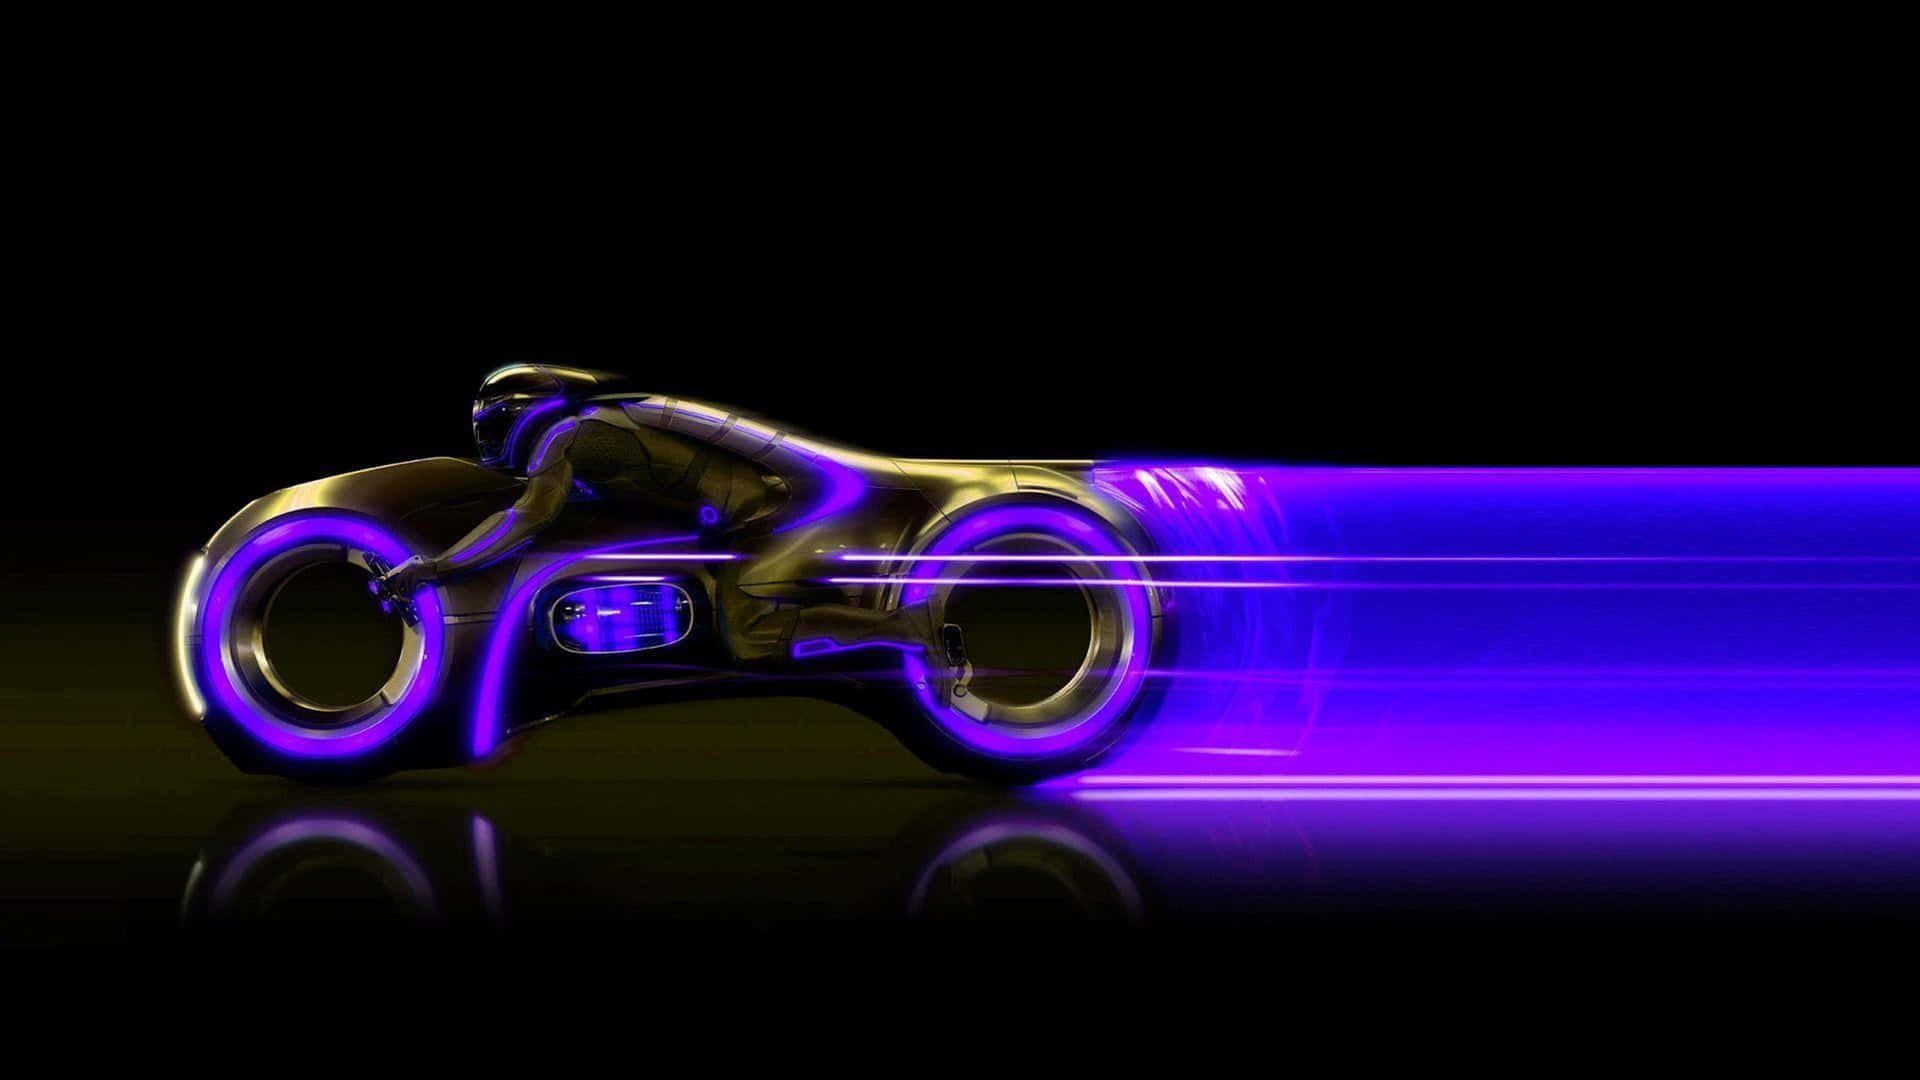 Explore The World of Tron in 4k Resolution Wallpaper